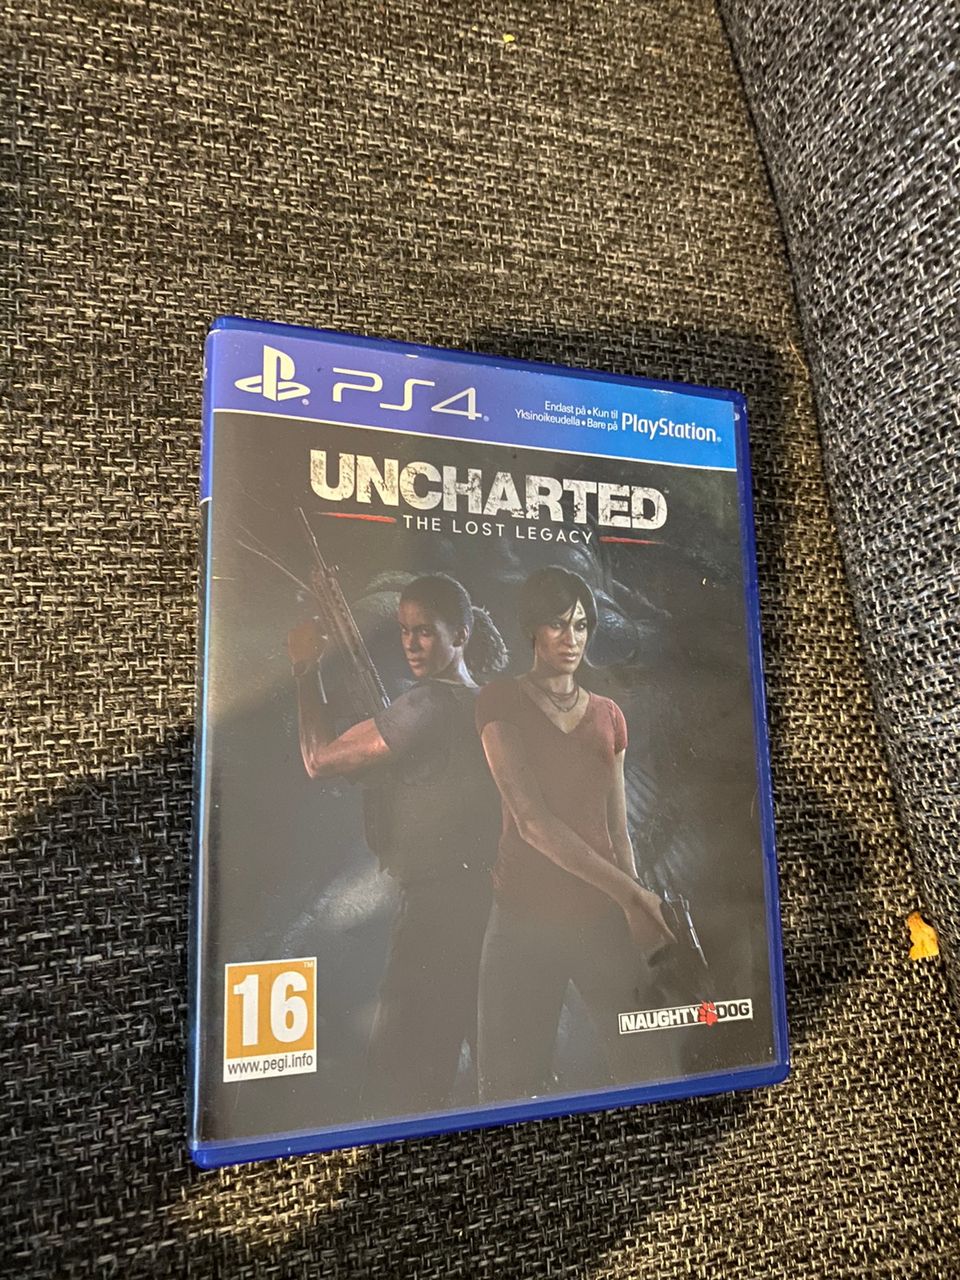 PS4/Uncharted Lost Legacy/GTAV